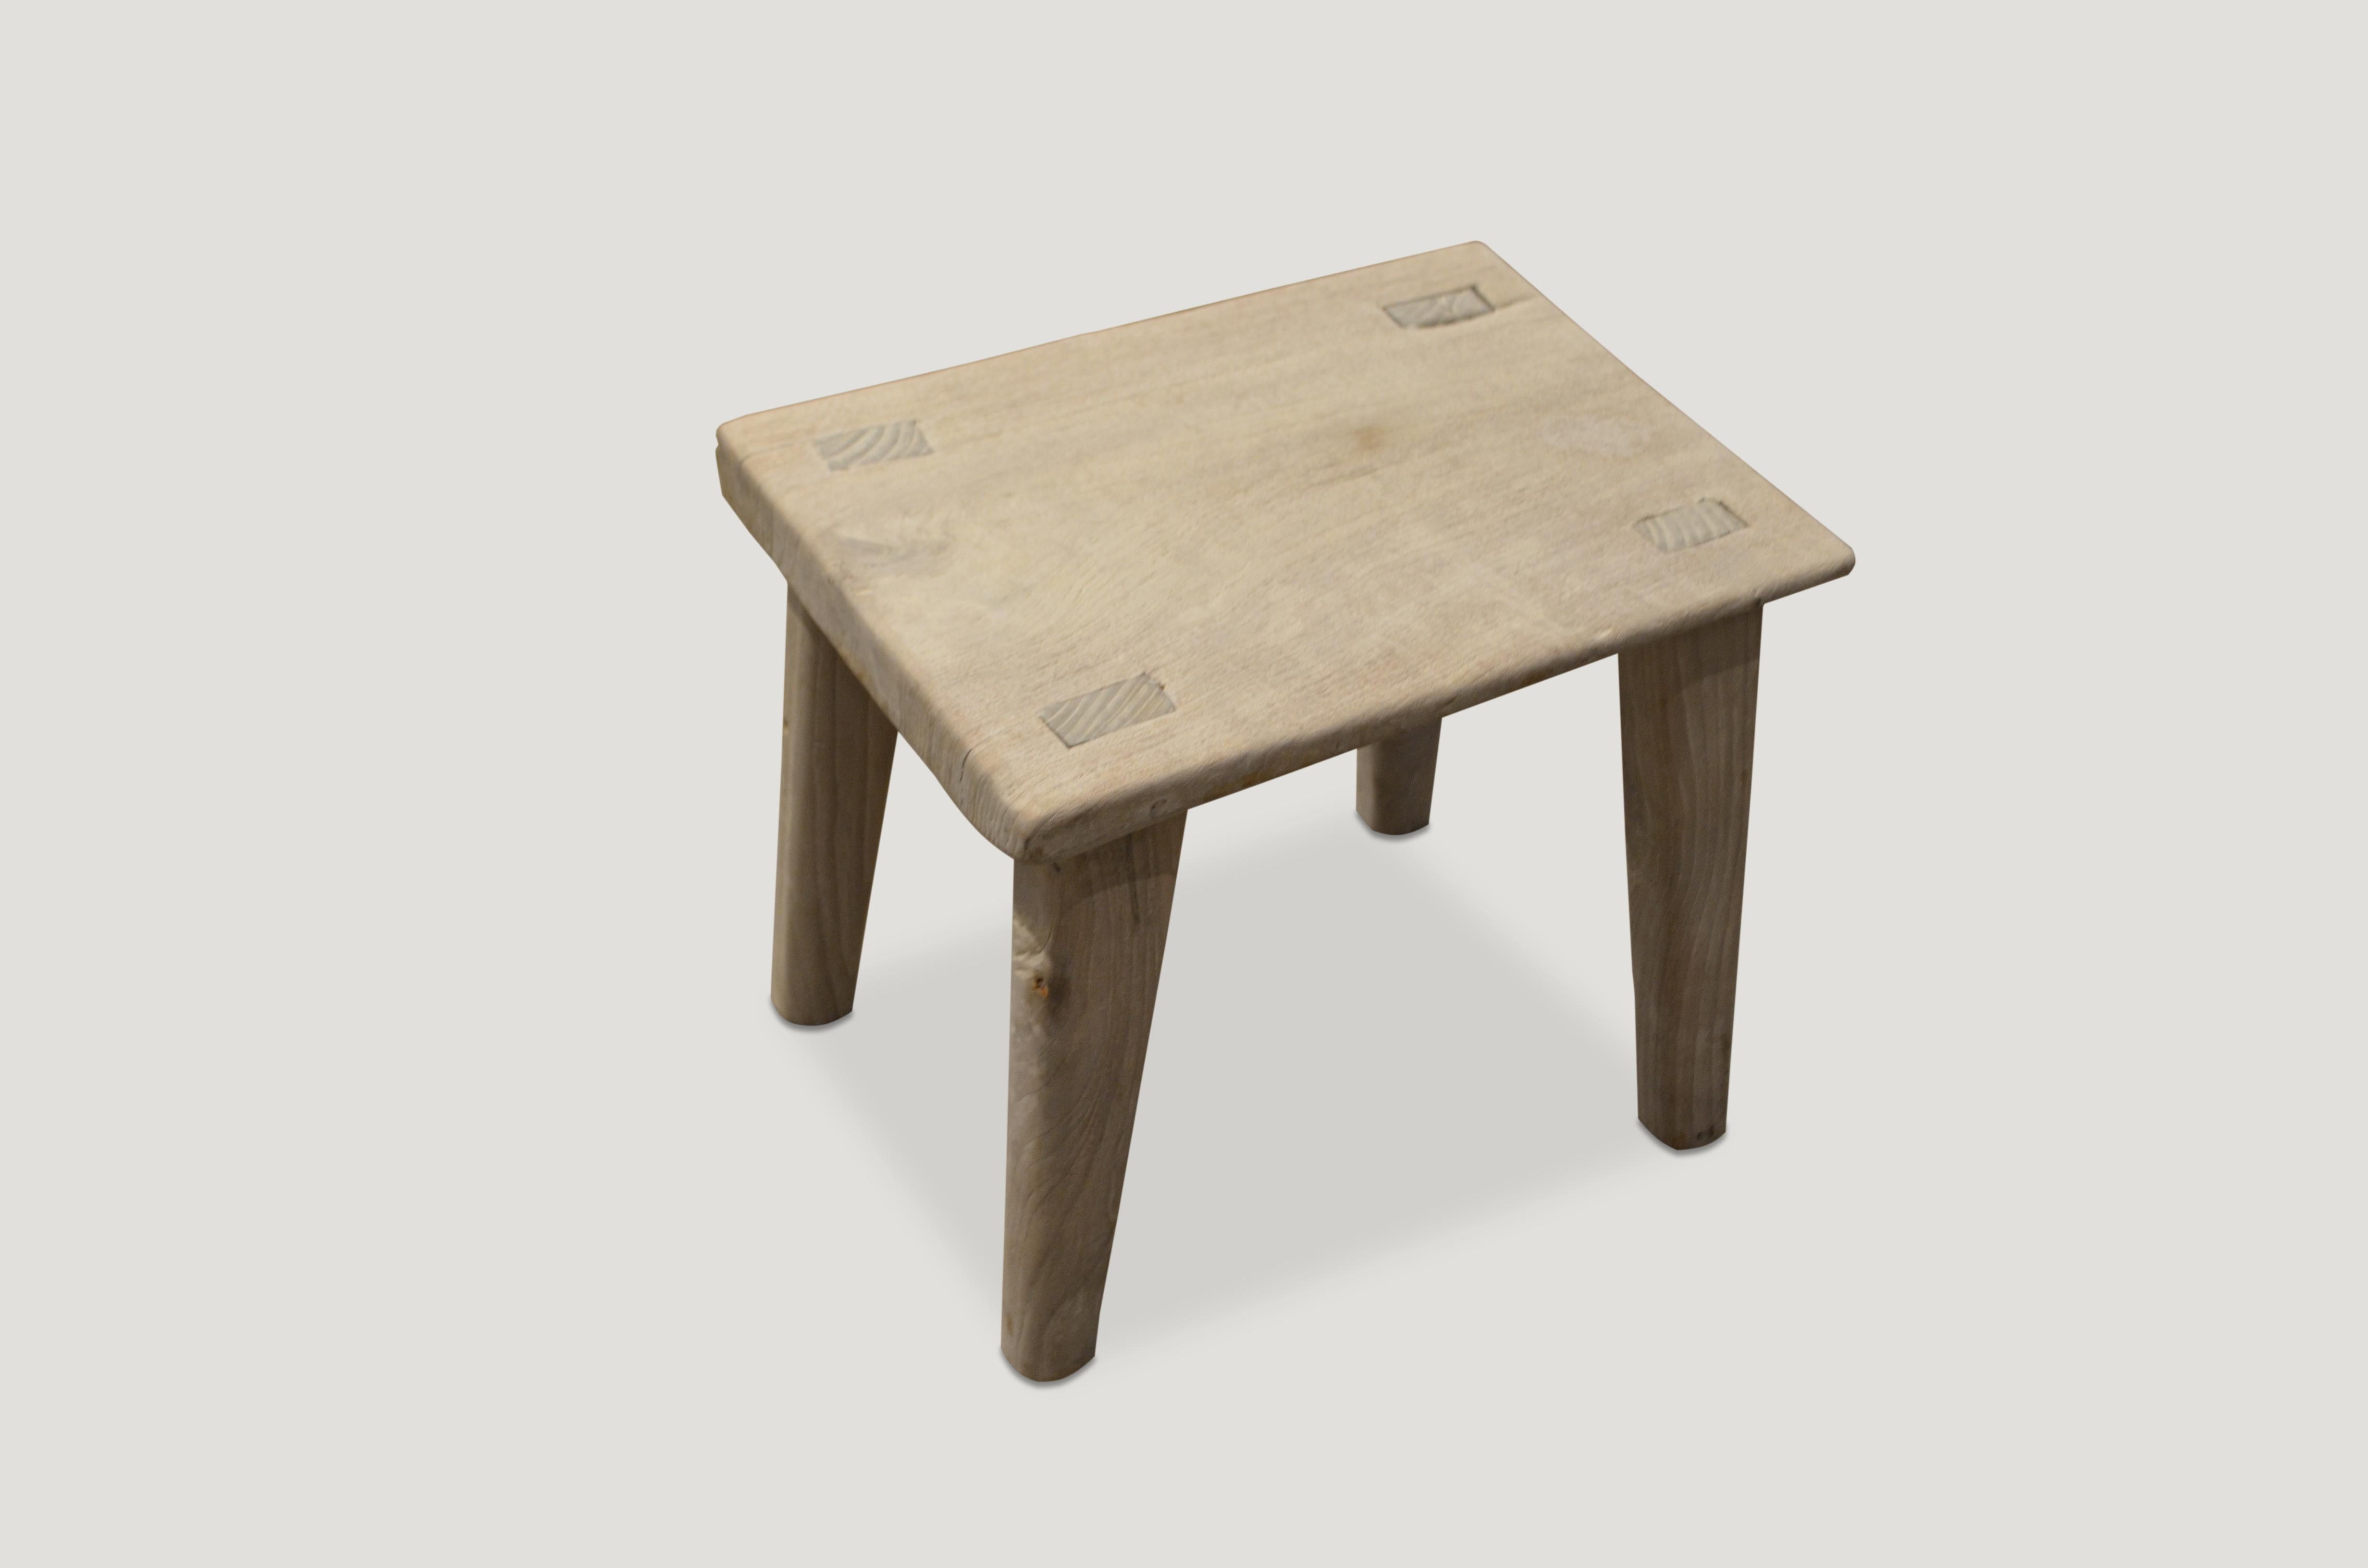 Reclaimed bleached teak wood stool or side table with a light white wash finish. Perfect for inside or outside living. We have a collection. The price reflects one.

The St. Barts collection features an exciting new line of organic white wash and